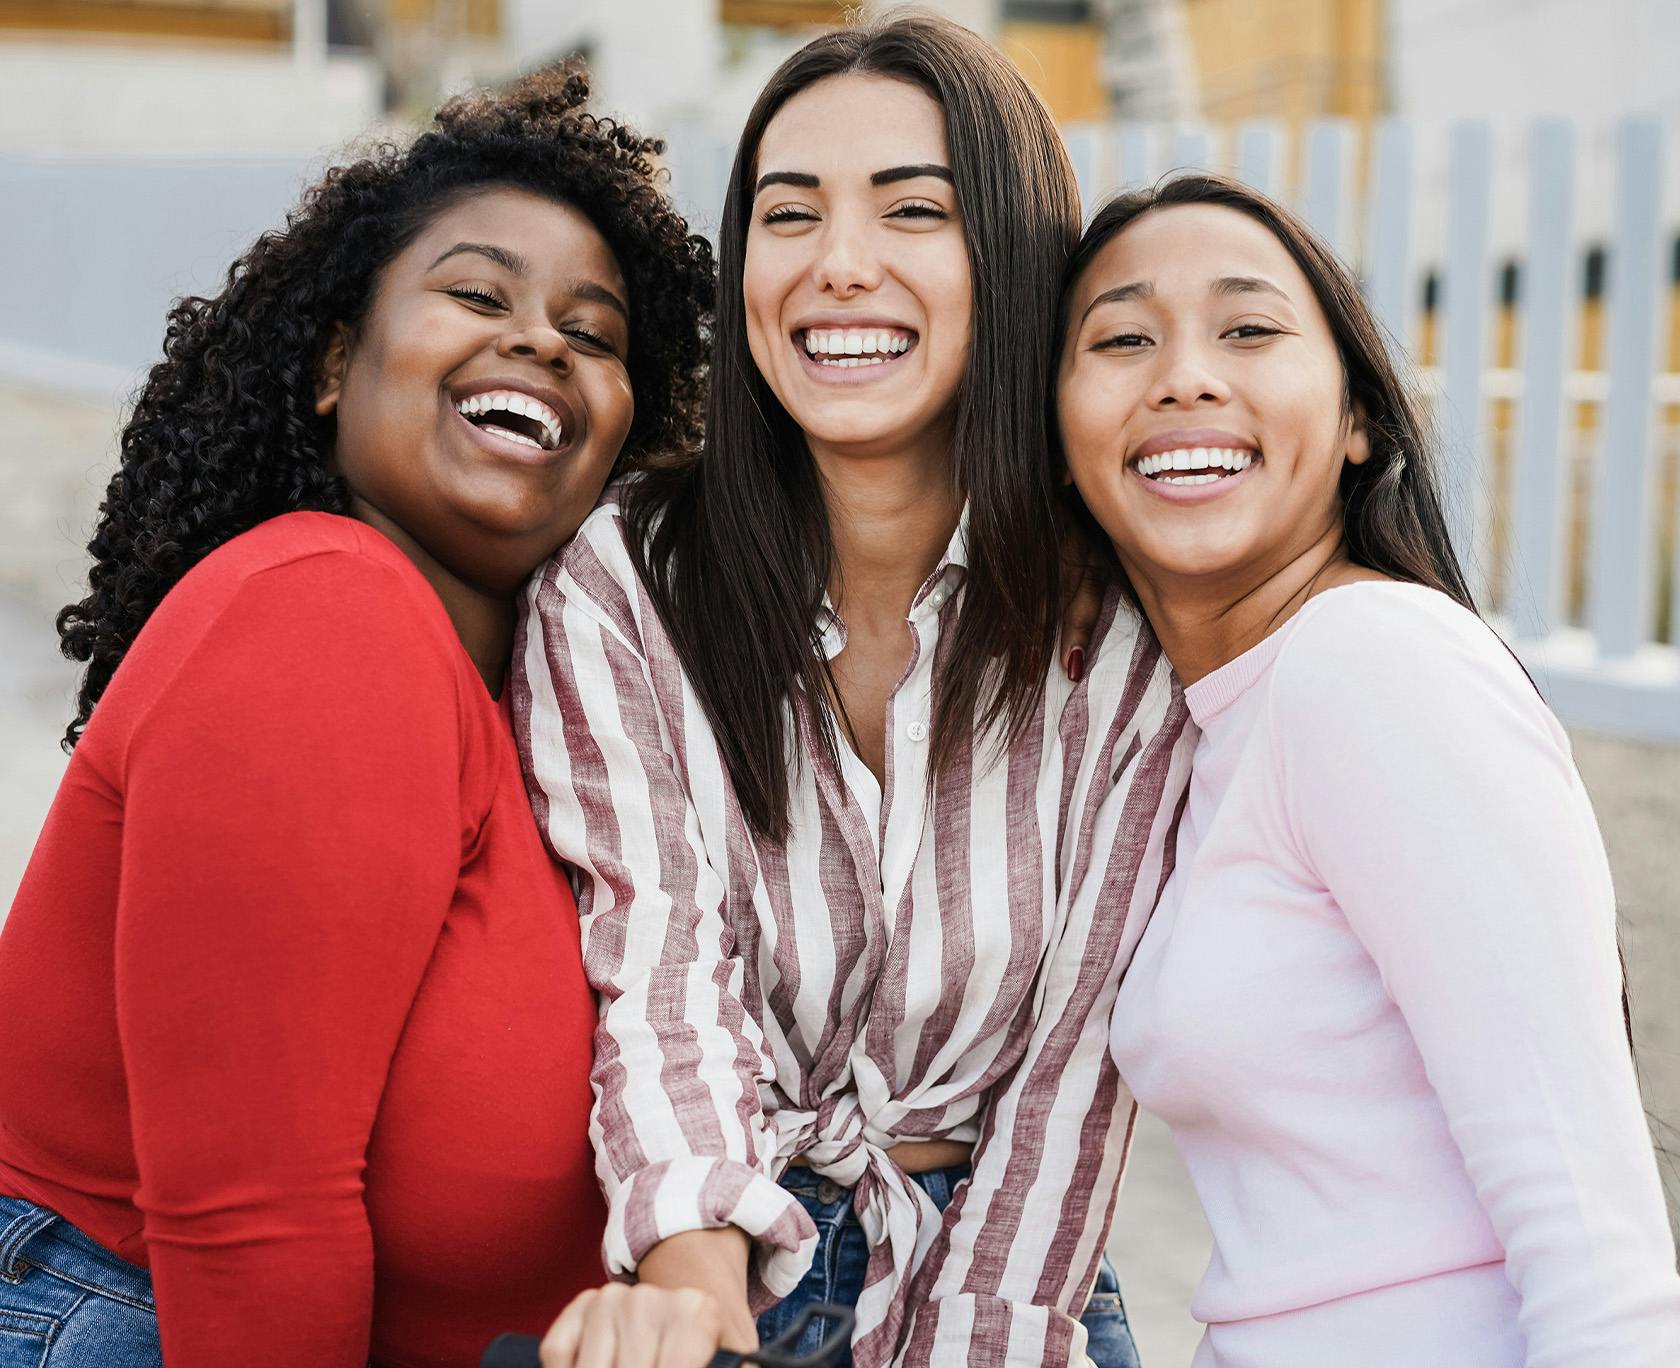 three women are smiling and posing for a picture together